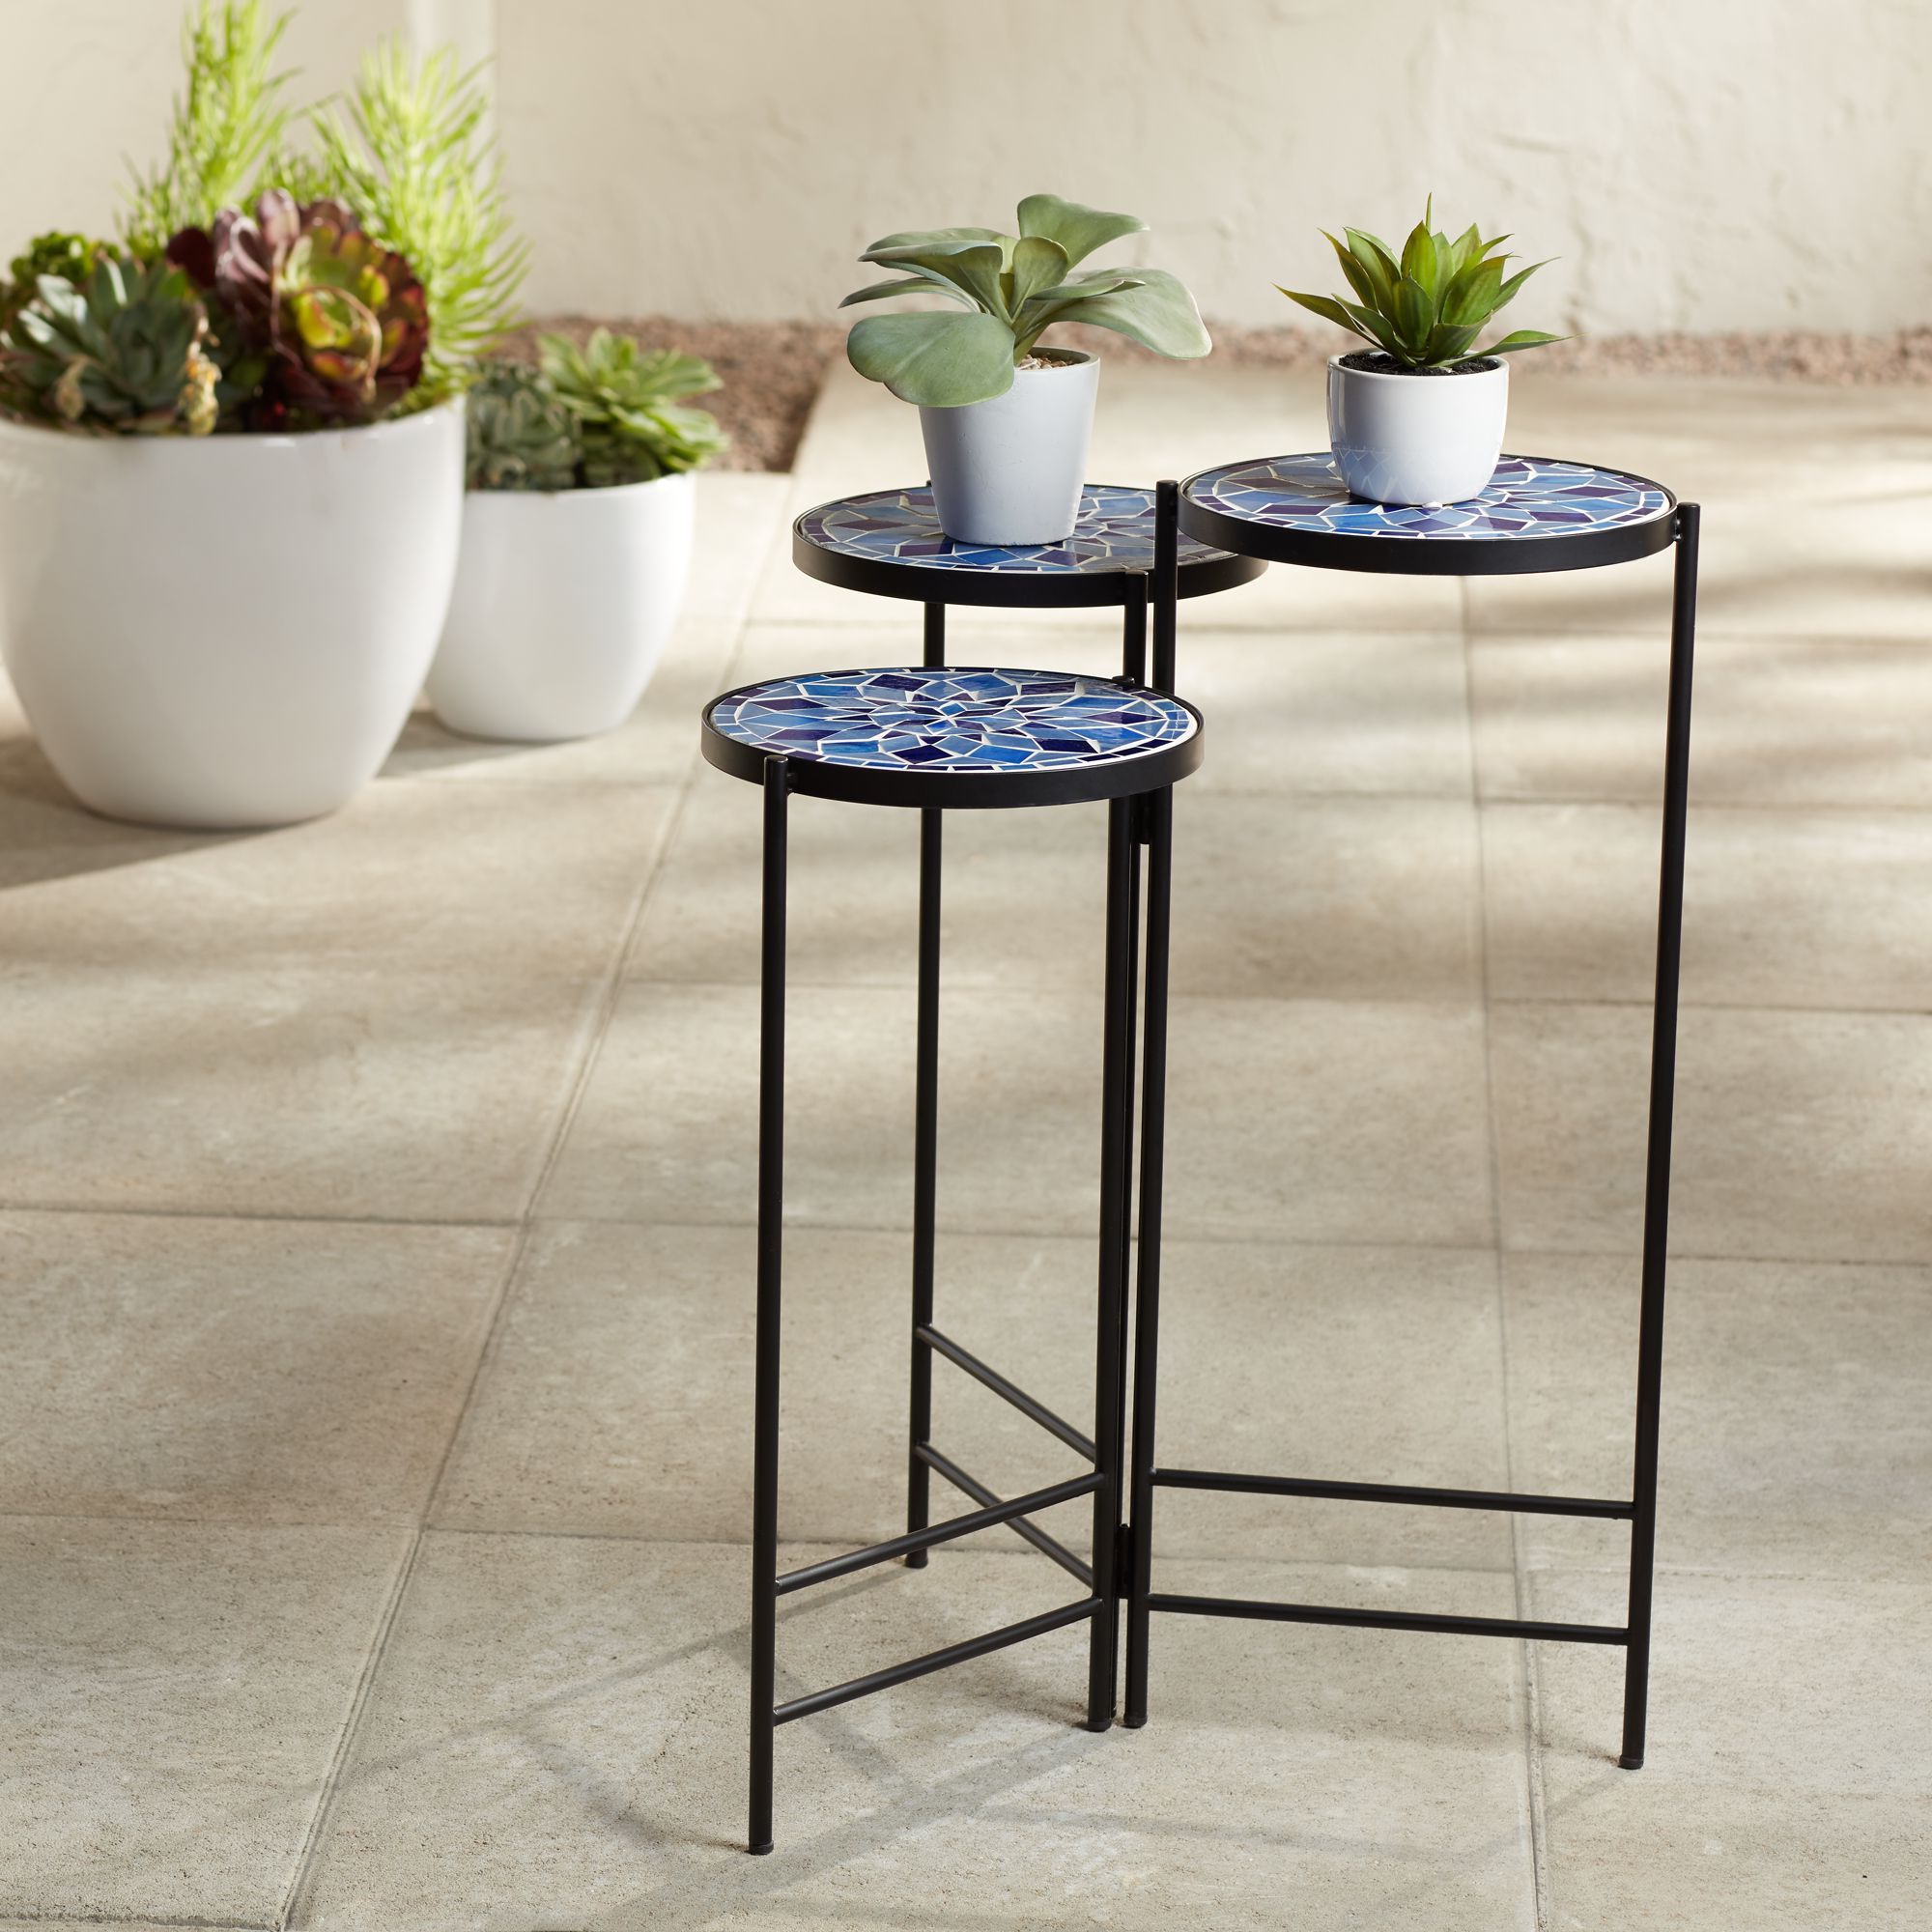 Mosaic Black Iron Outdoor Accent Tables With Most Up To Date Teal Island Designs Blue Mosaic Black Iron Set Of 3 Accent Tables (View 7 of 15)